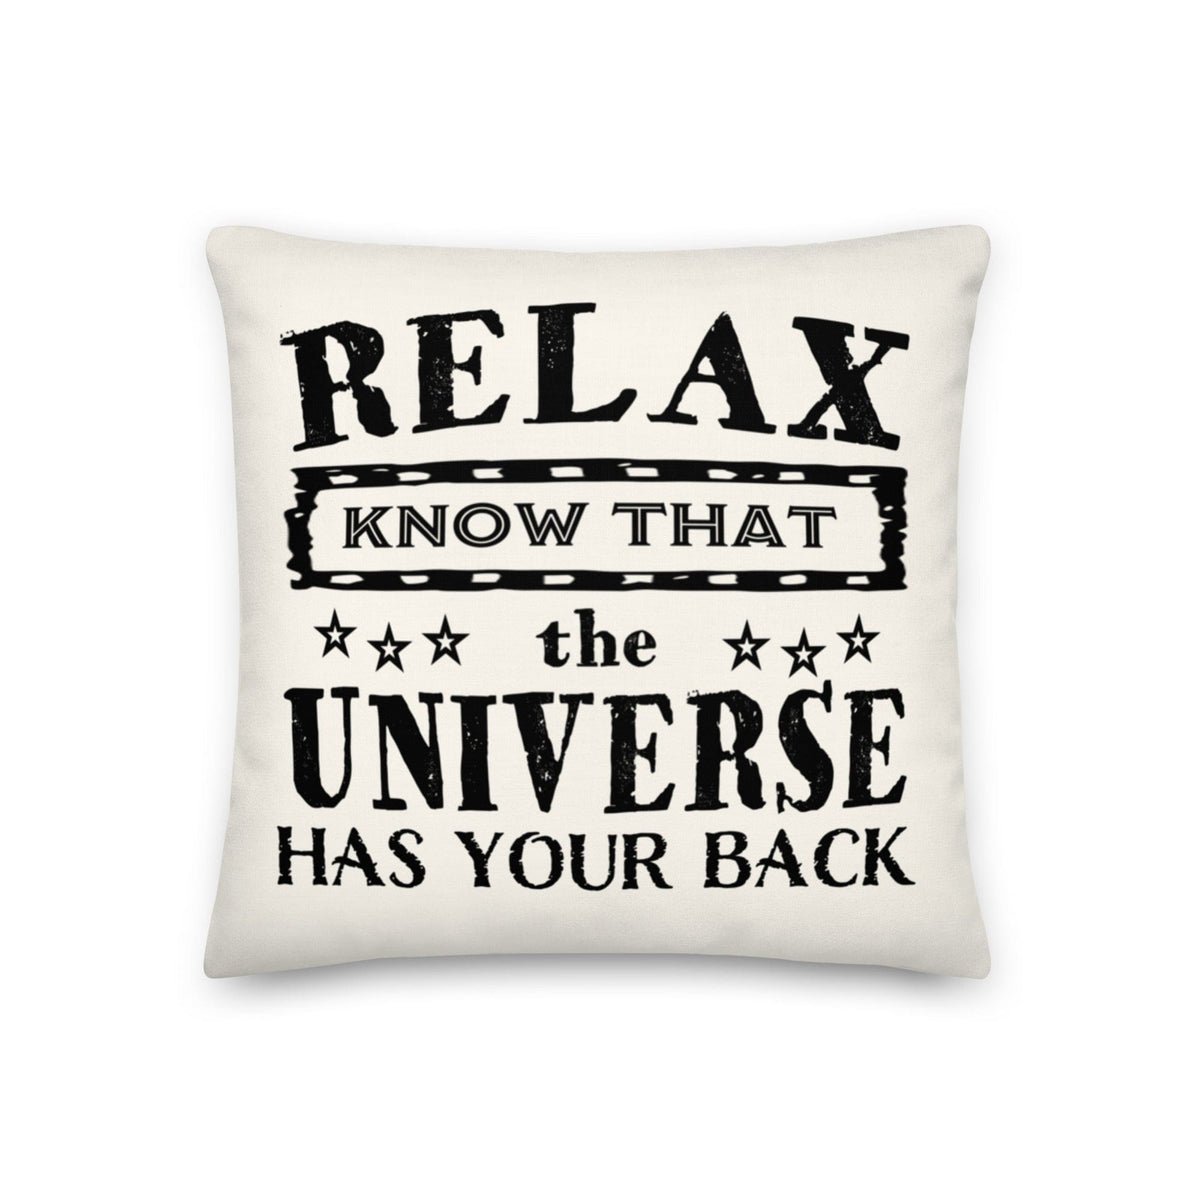 The Universe Has Your Back Inspirational Quote Accent Pillow Throw Pillows A Moment Of Now Women’s Boutique Clothing Online Lifestyle Store